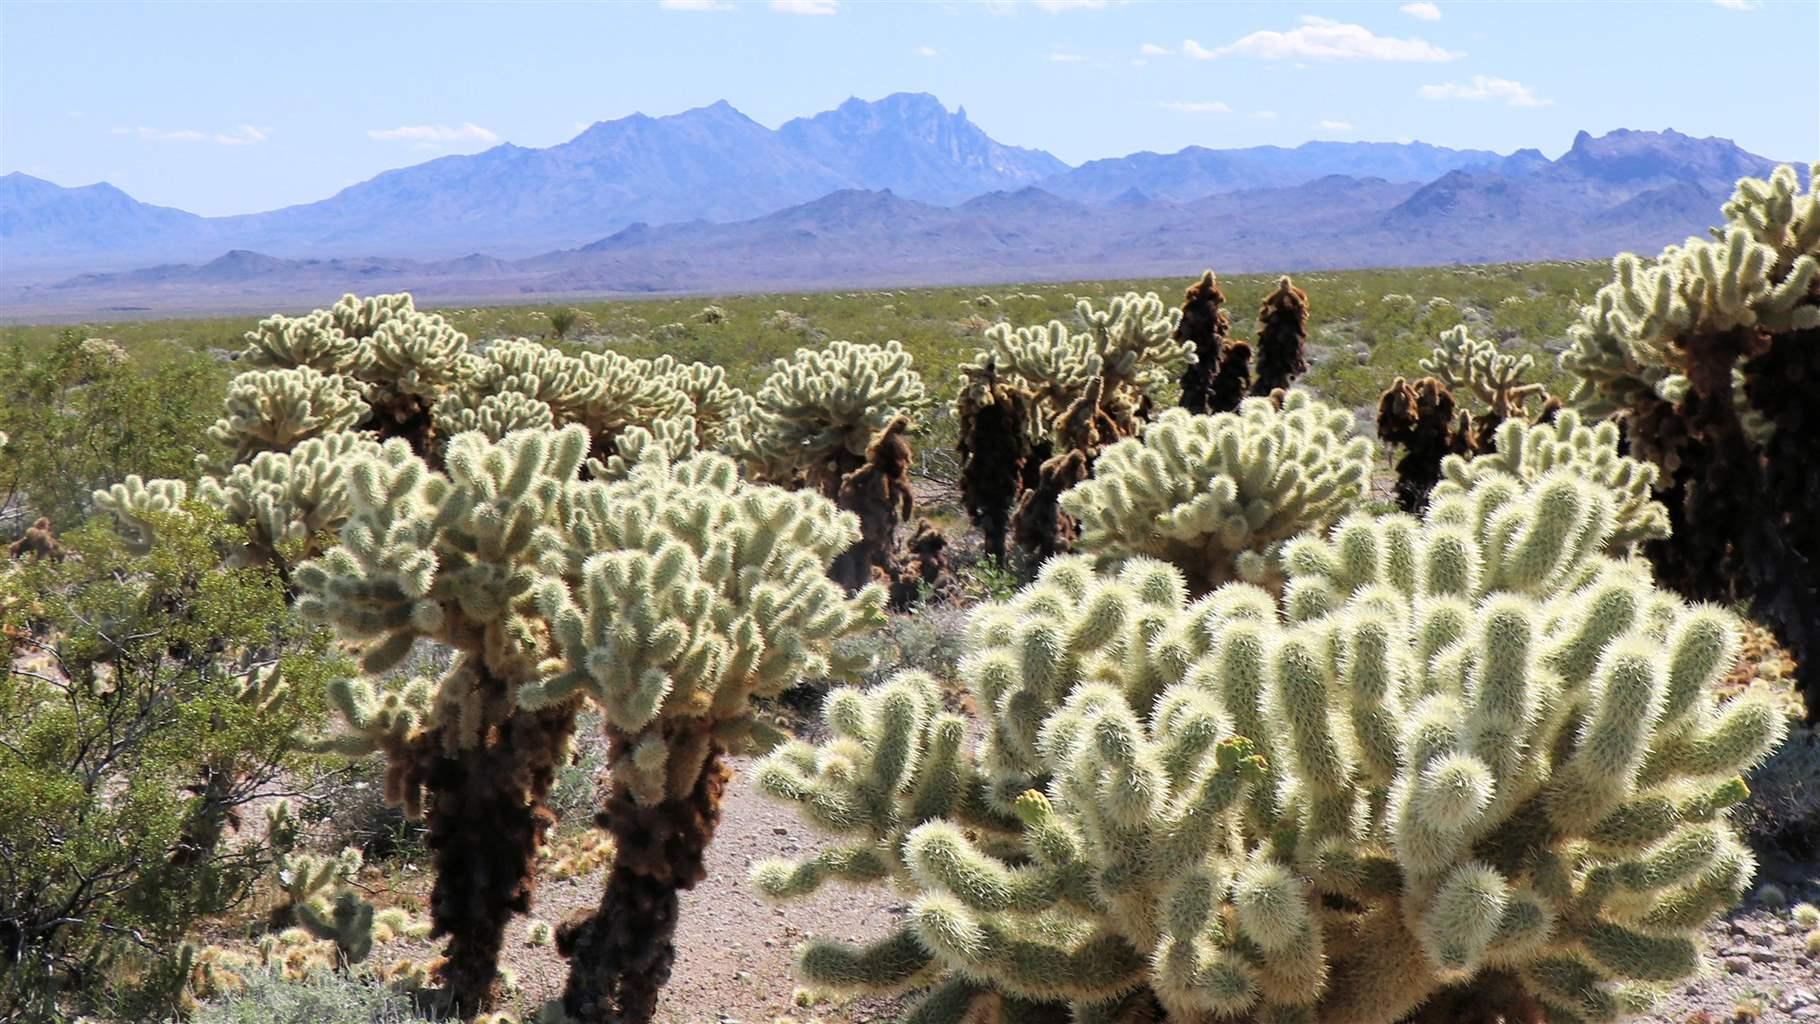  Spirit Mountain rises in the distance behind a grove of teddy bear cholla cacti.